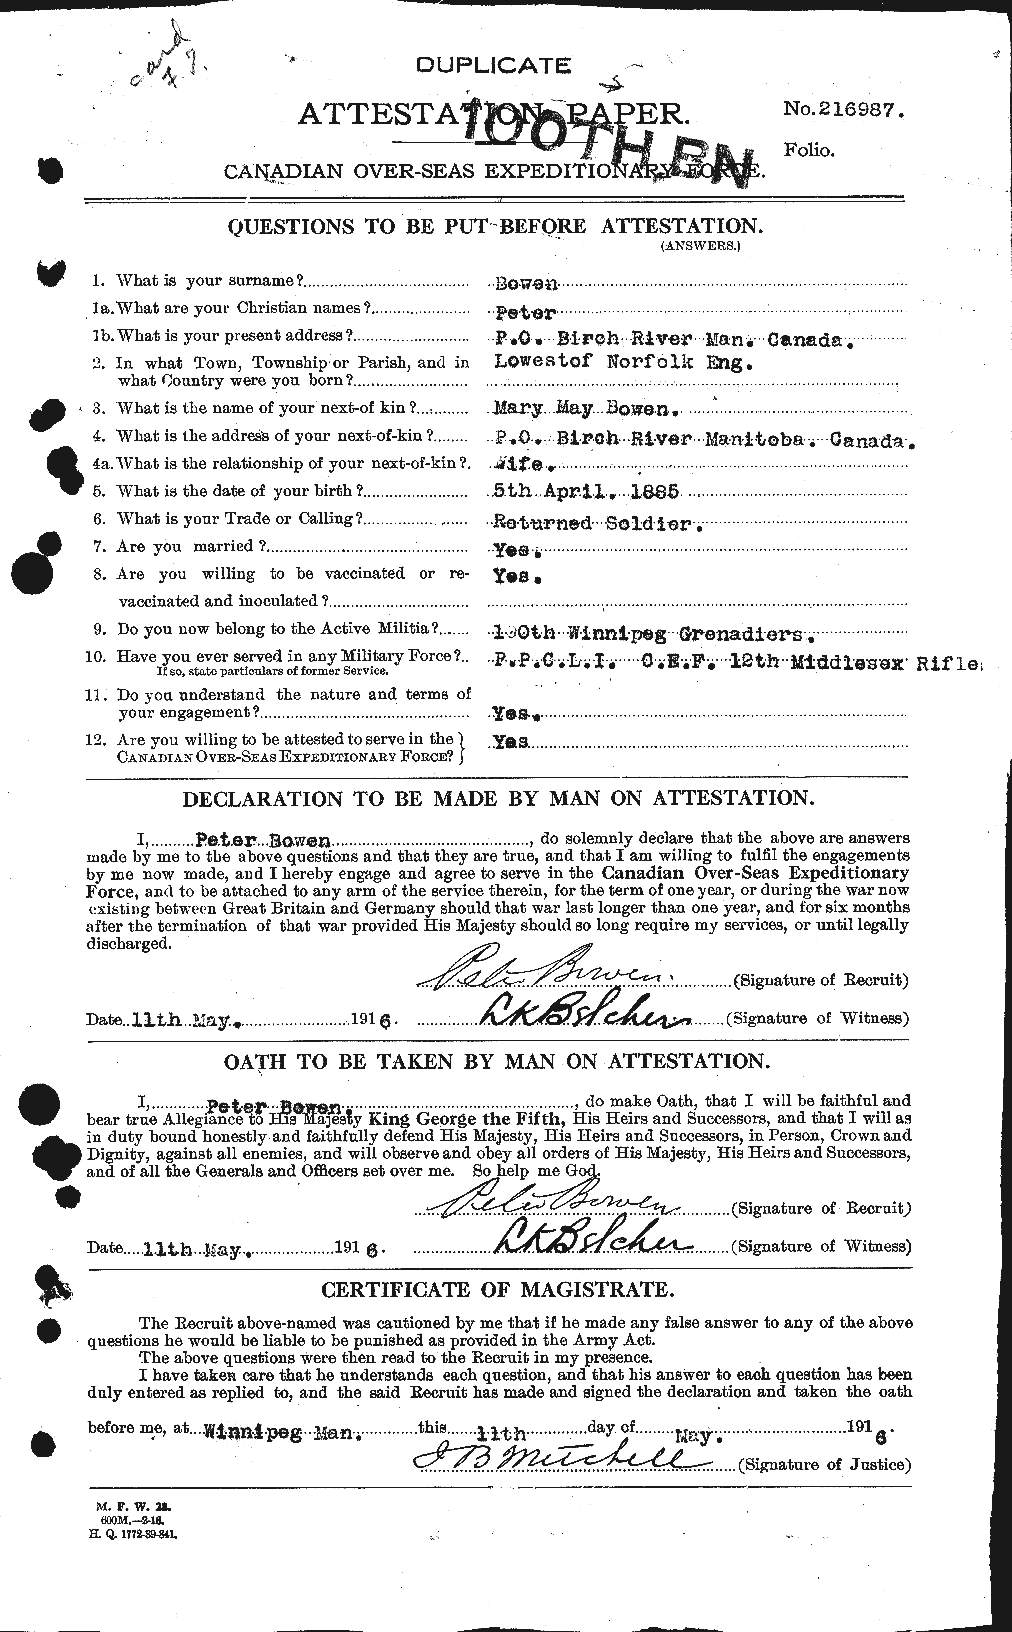 Personnel Records of the First World War - CEF 255454a